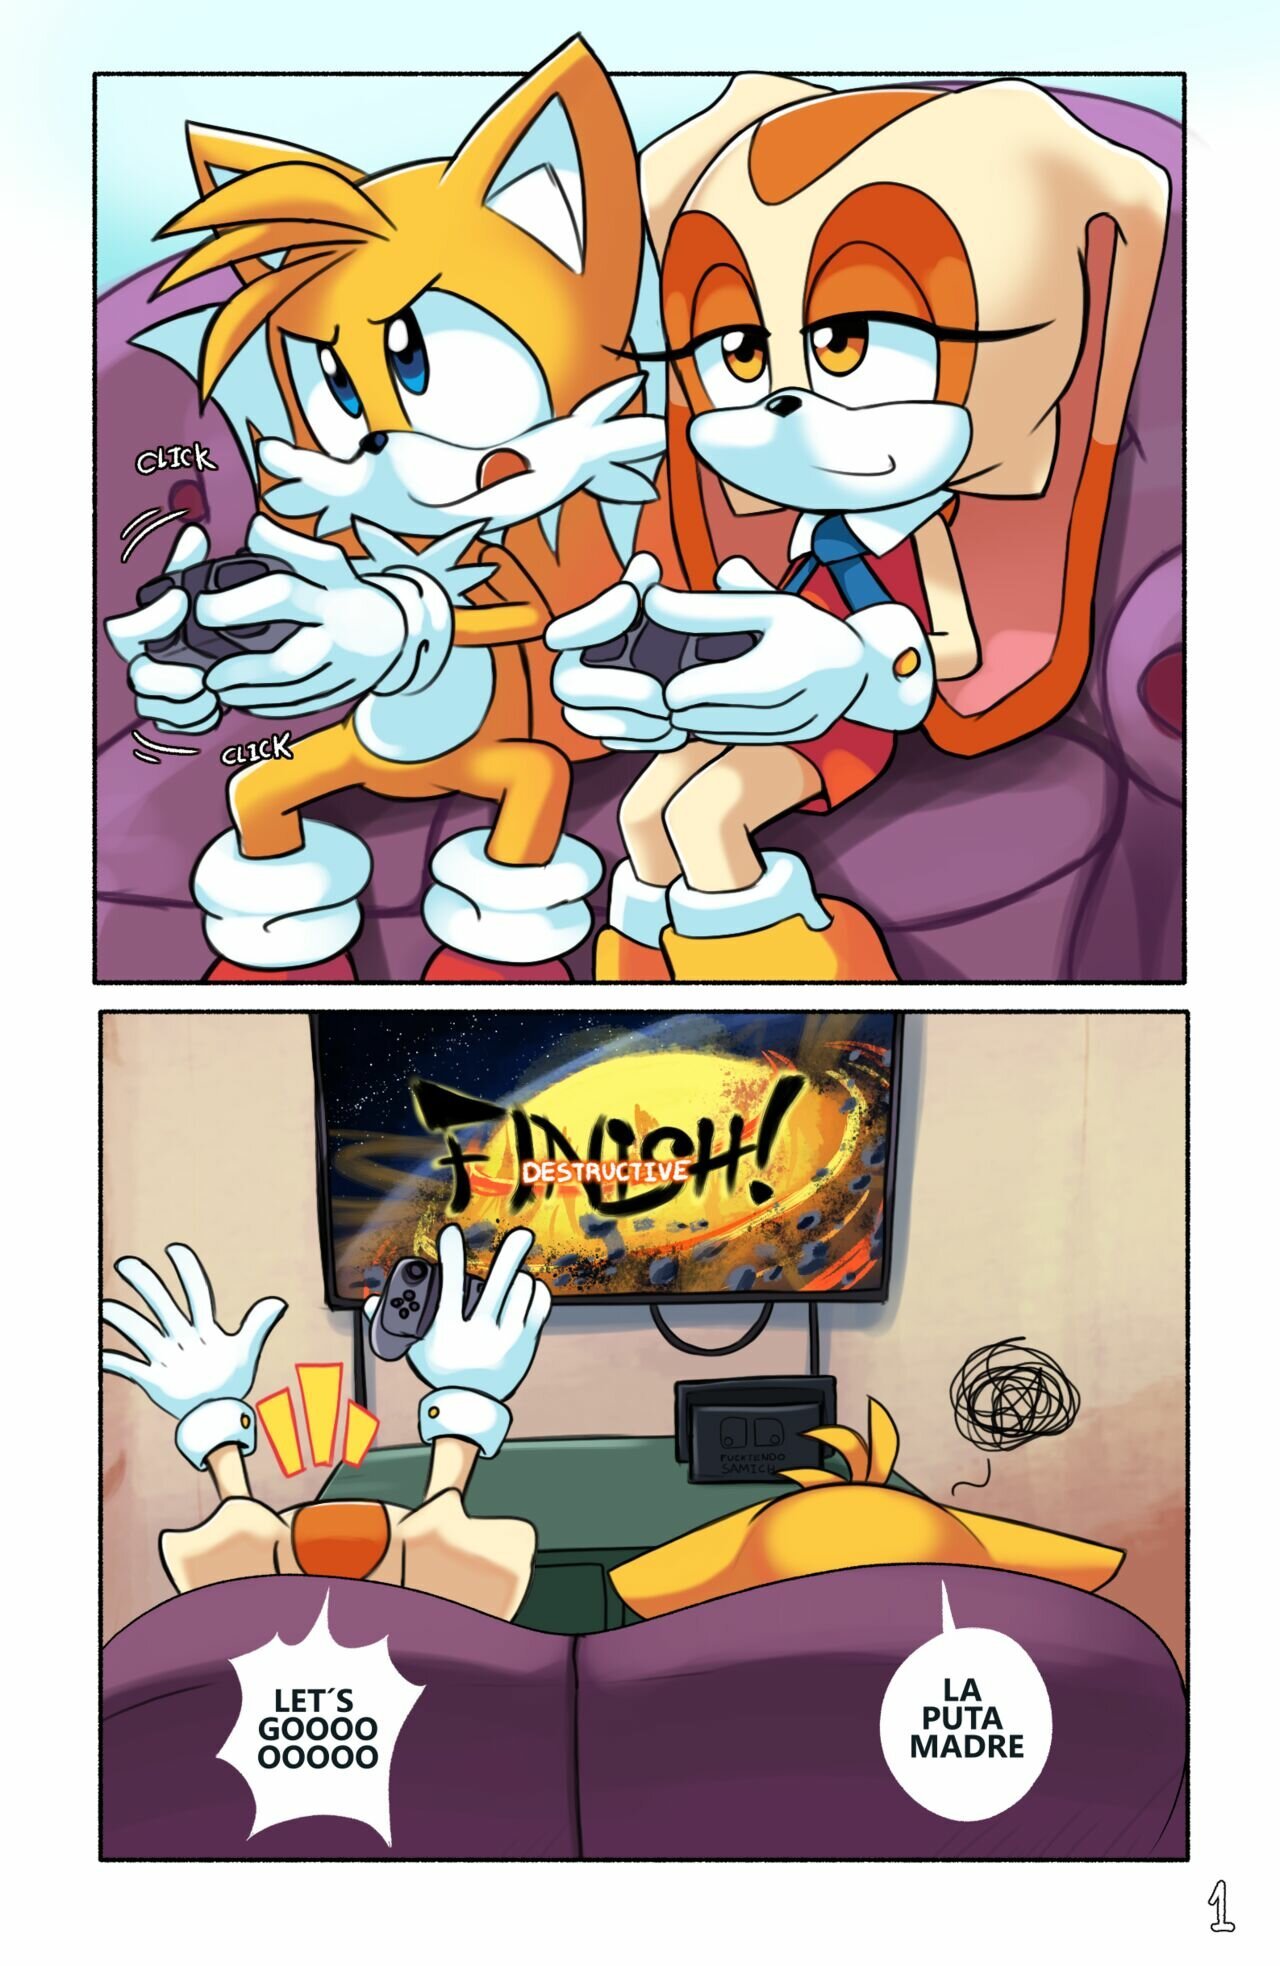 Tails Gamer Moment - 3